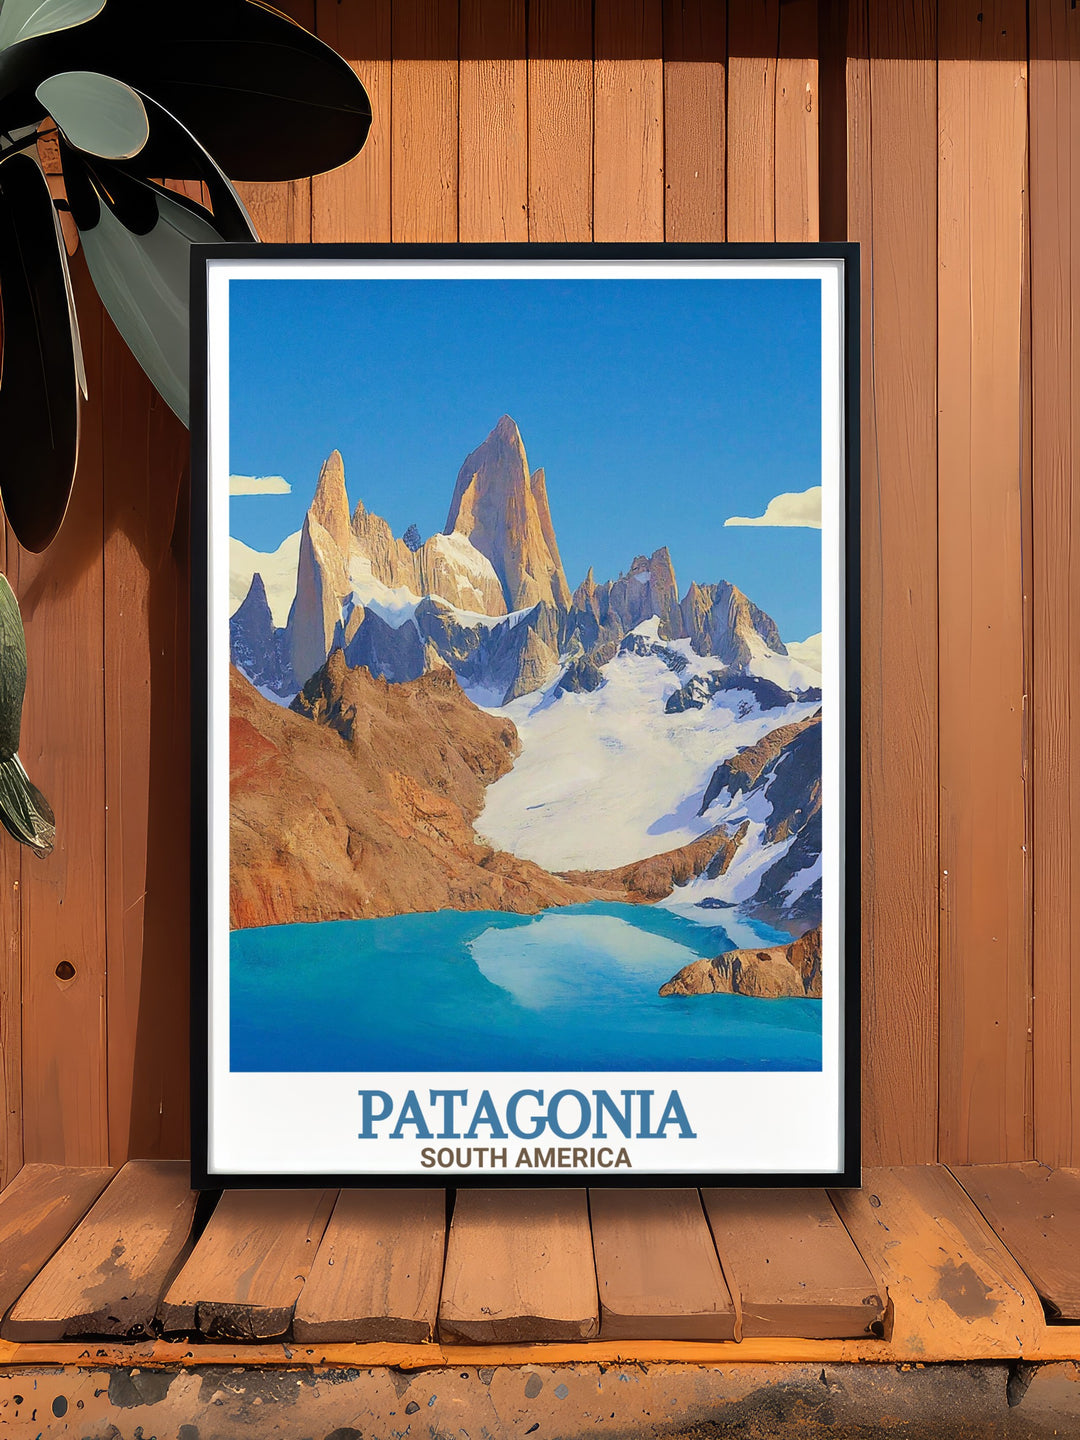 Chile wall art featuring Torres Del Paine and Mount Fitz Roy. A blend of retro and modern styles capturing the breathtaking scenery of Patagonia. Perfect for adding elegance and adventure to any room.